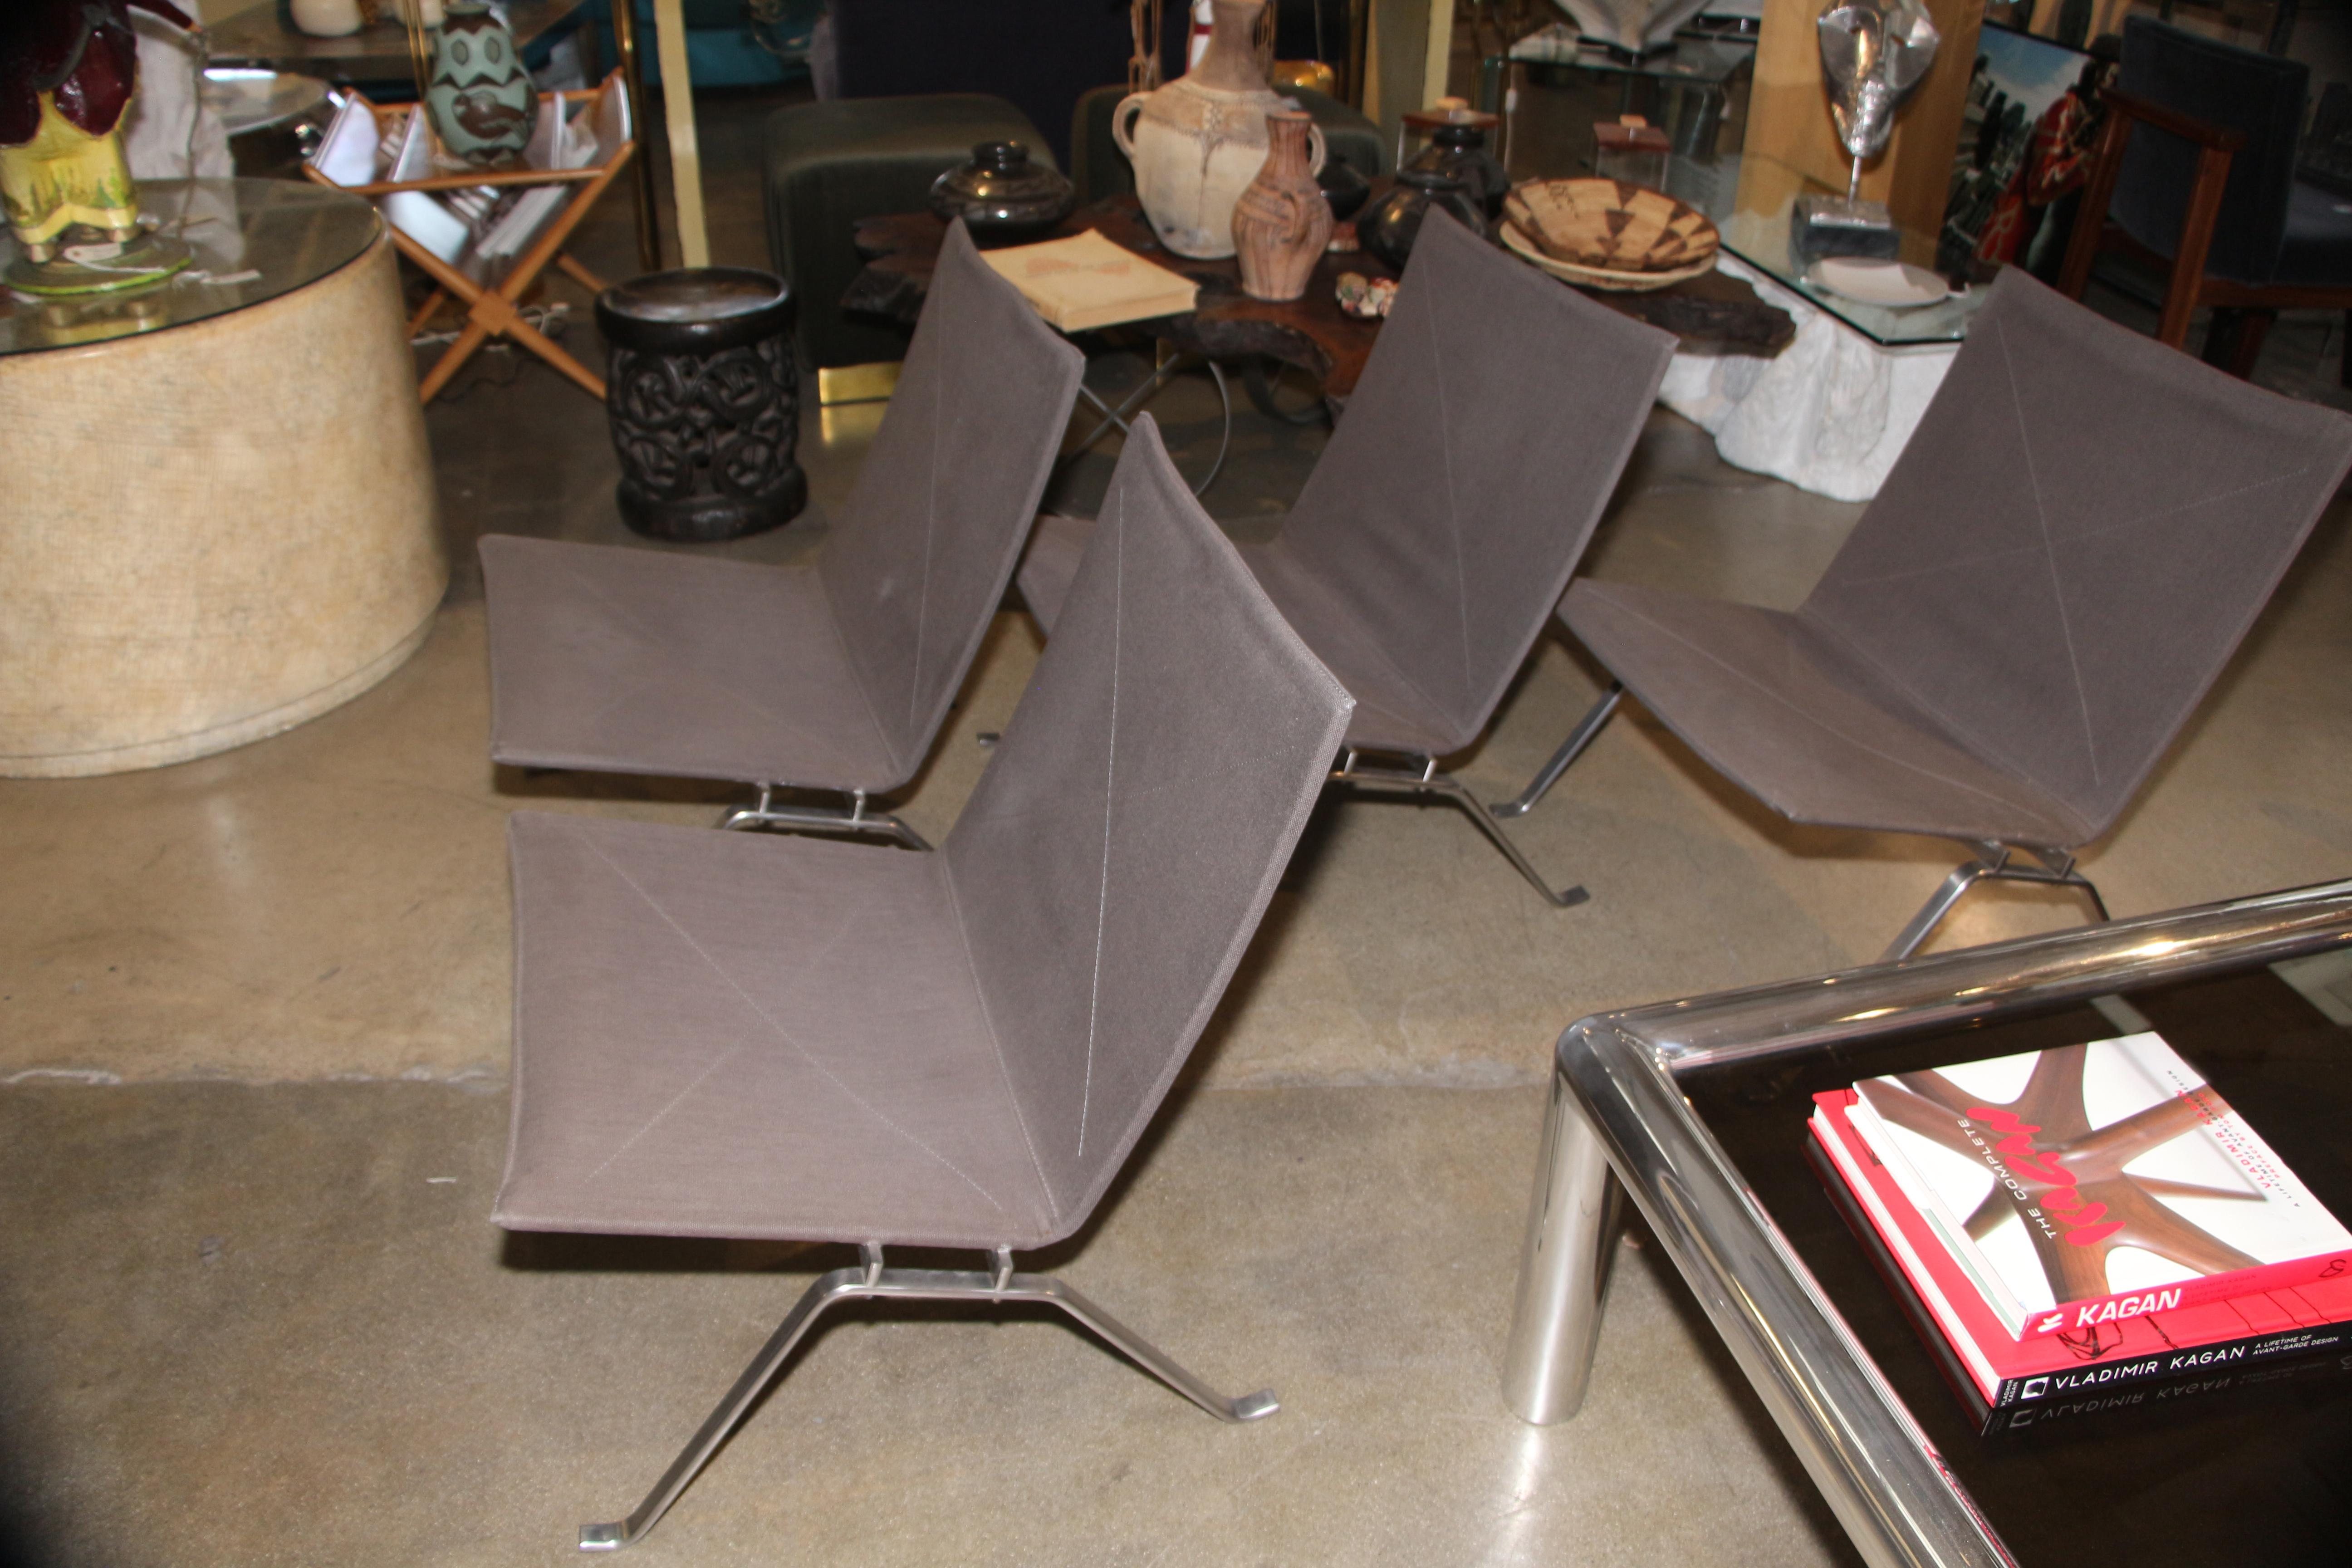 Priced each we have 4 Paul Kjaerholm PK 22 chairs from Fritz Hansen labeled and dated 2004. We believe these chairs were only produced in this color for 2 years. These chairs come with matching Grey Sunbrella fitted covers. These chairs have some